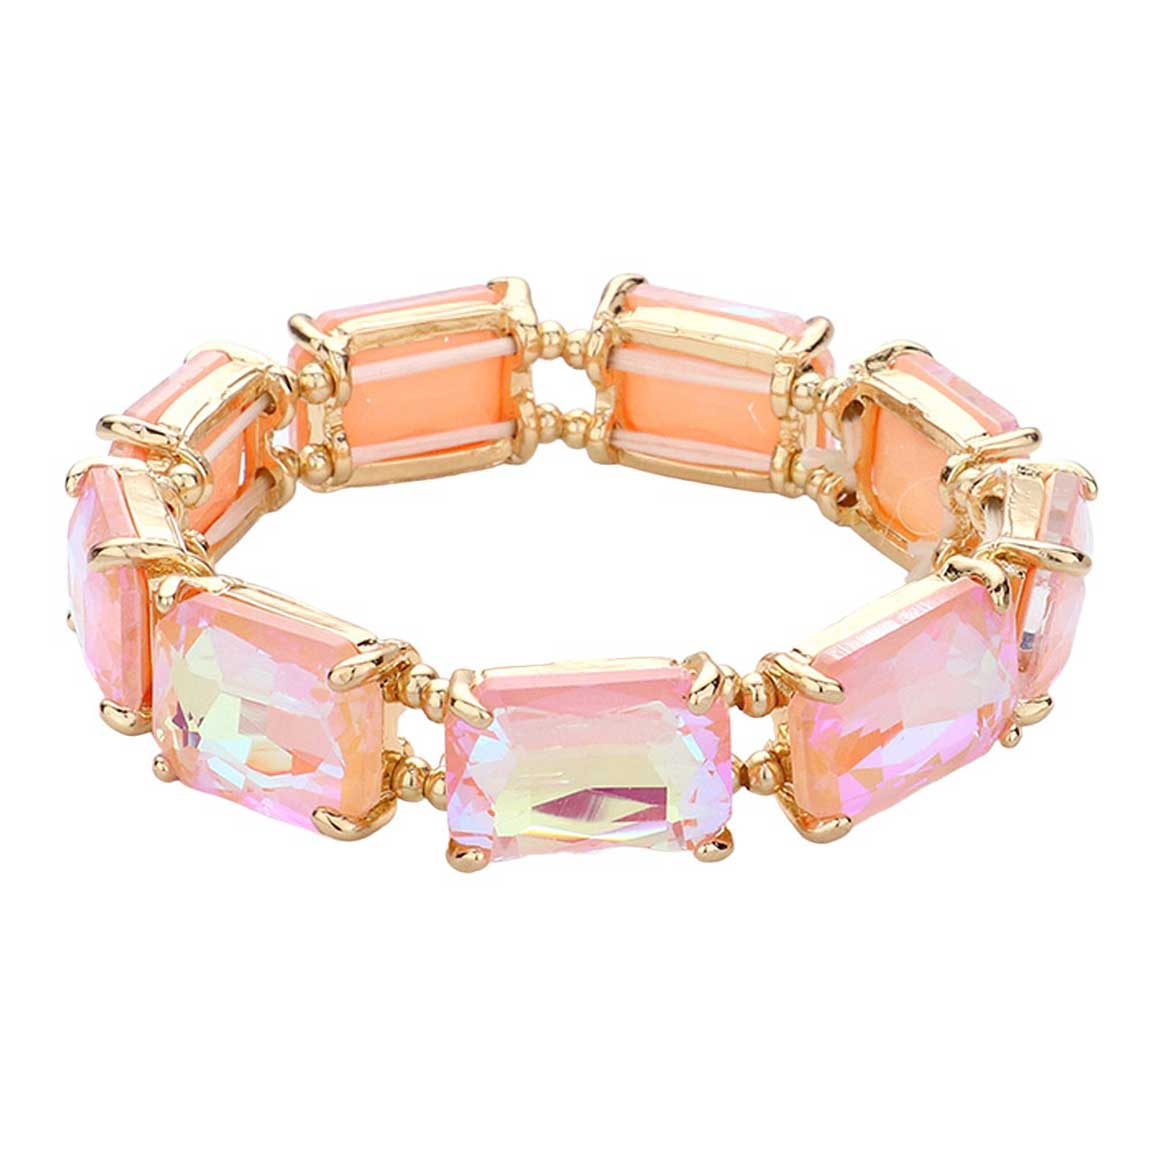 AB Pink Emerald Cut Stone Stretch Evening Bracelet, get ready with this Stretch Evening Bracelet to receive the best compliments on any special occasion. Put on a pop of color to complete your ensemble and make you stand out on special occasions. It looks so pretty, bright, and elegant on any special occasion. 